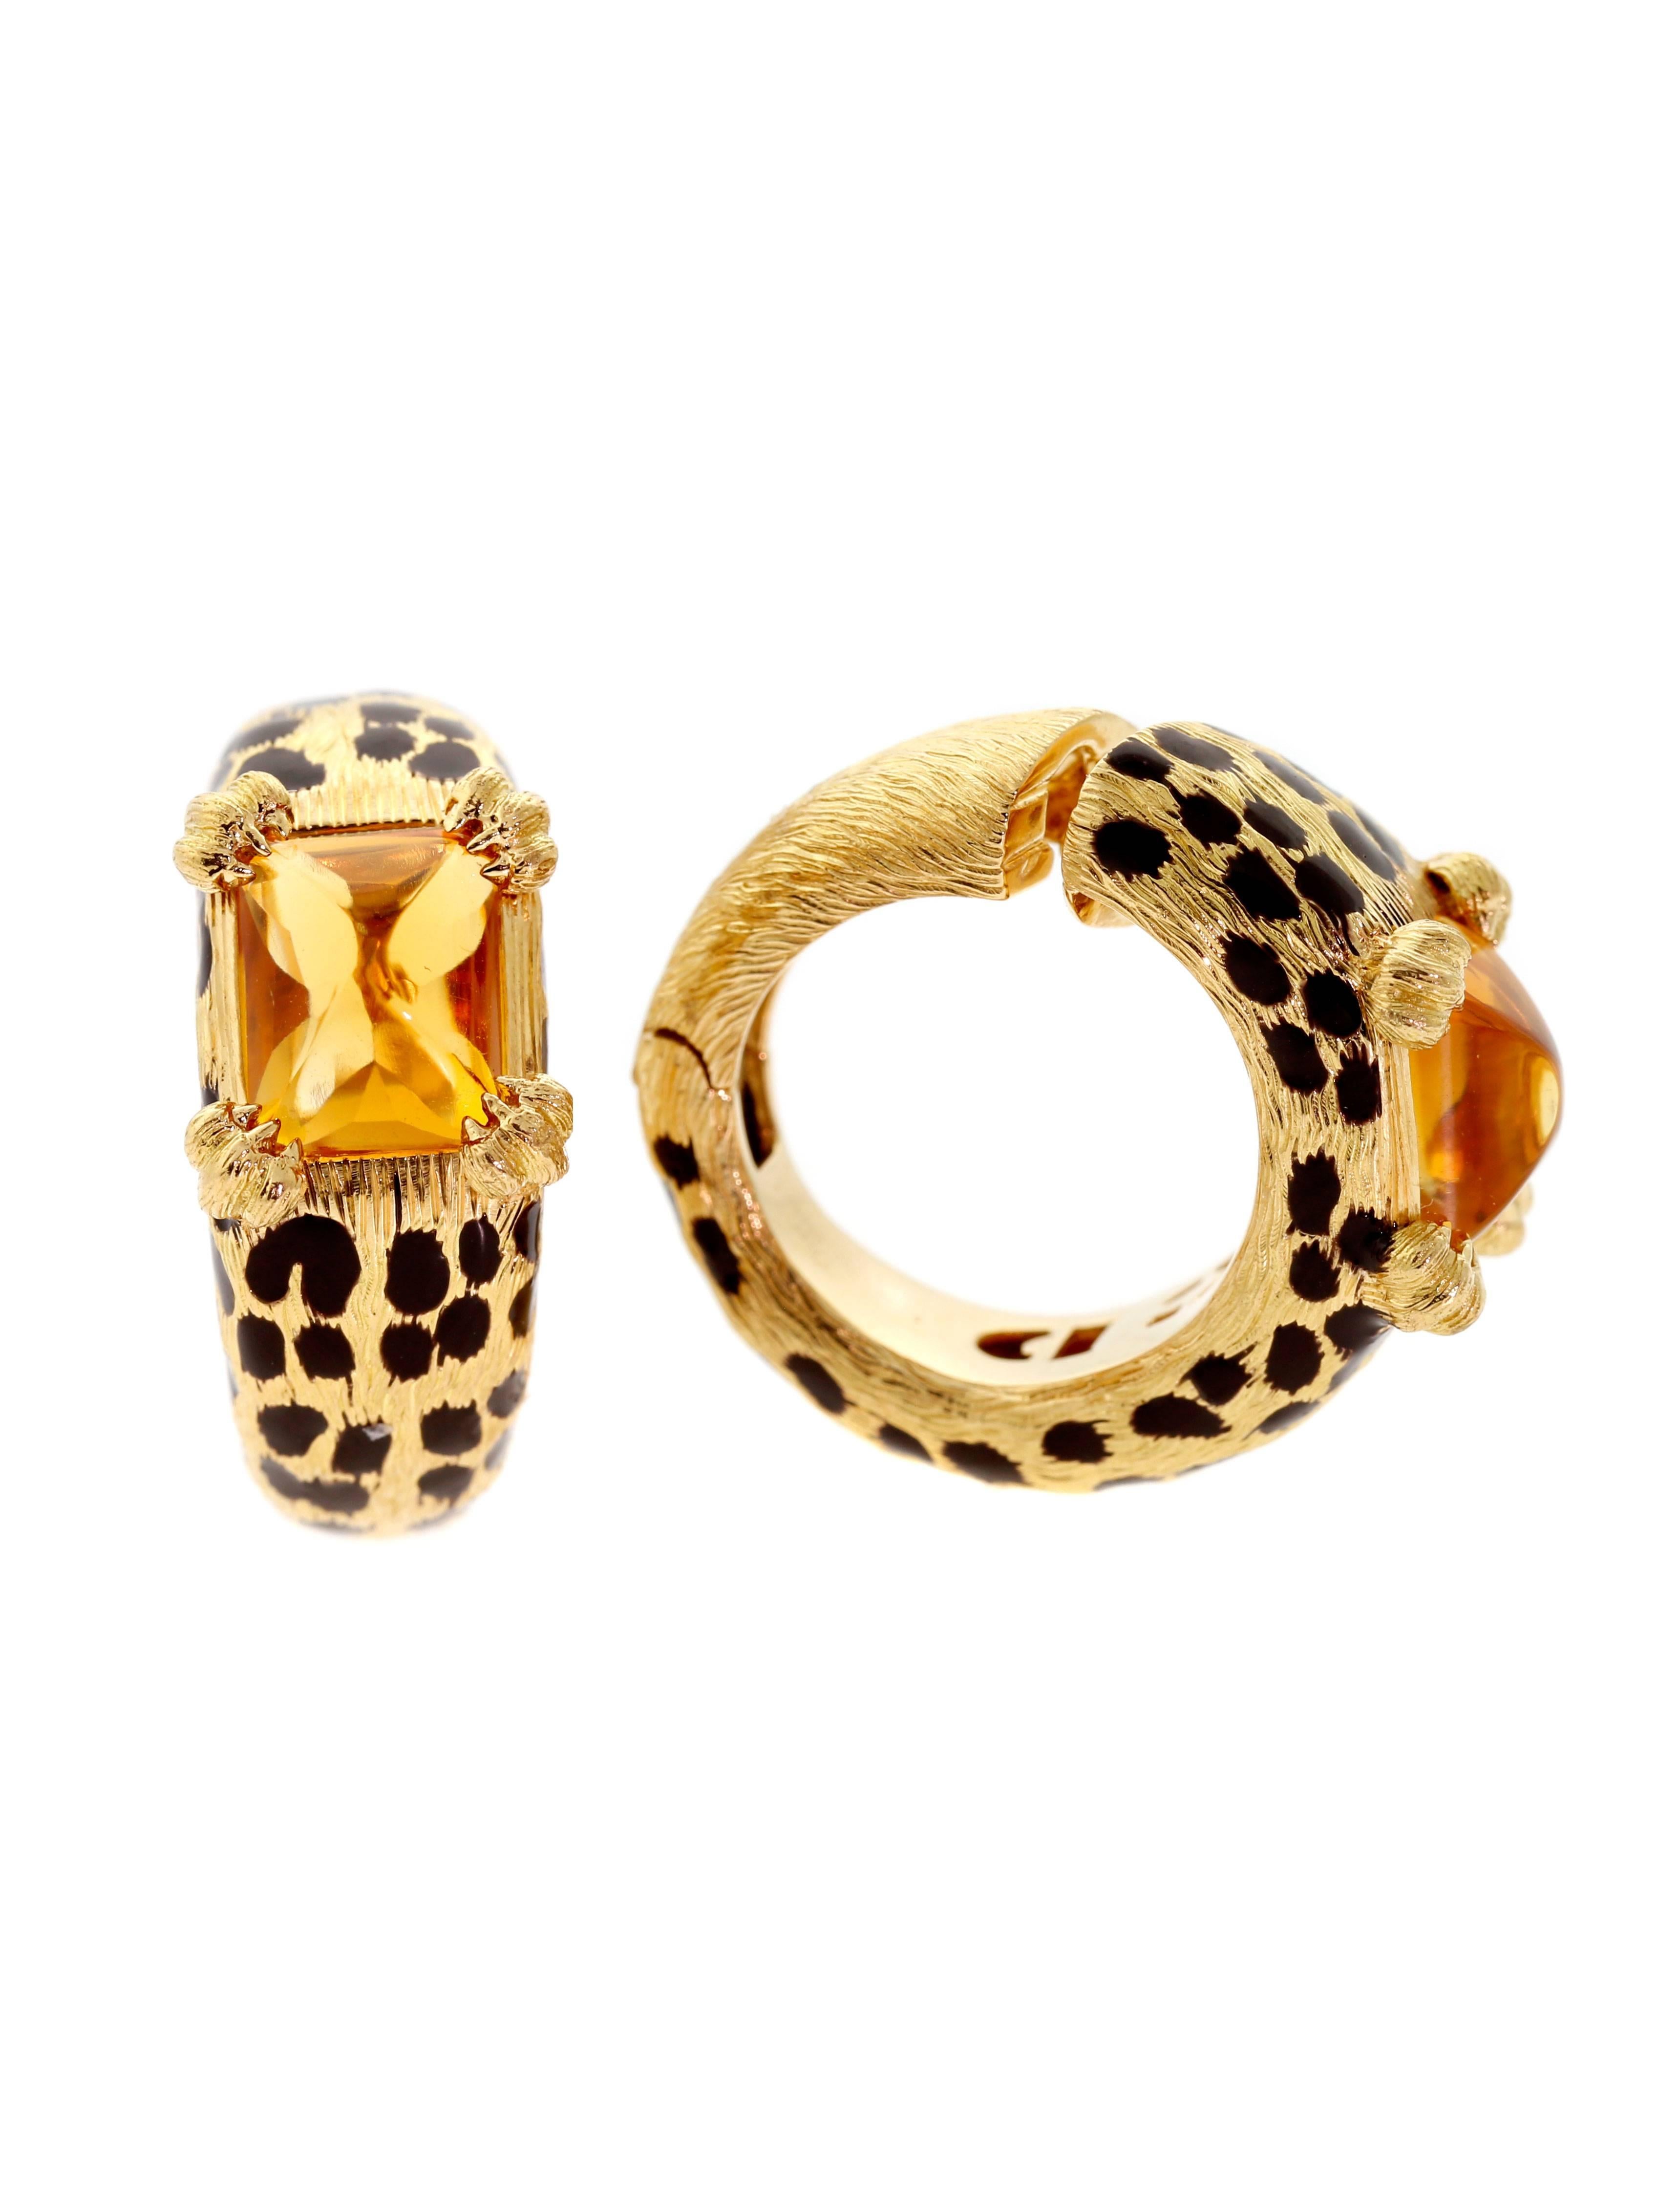 A stunning pair of Dior earrings featuring Citrine, and enamel spots to represent a leopard. Crafted in 18k Yellow Gold weighing 28.4 grams.

Earring Width: .43